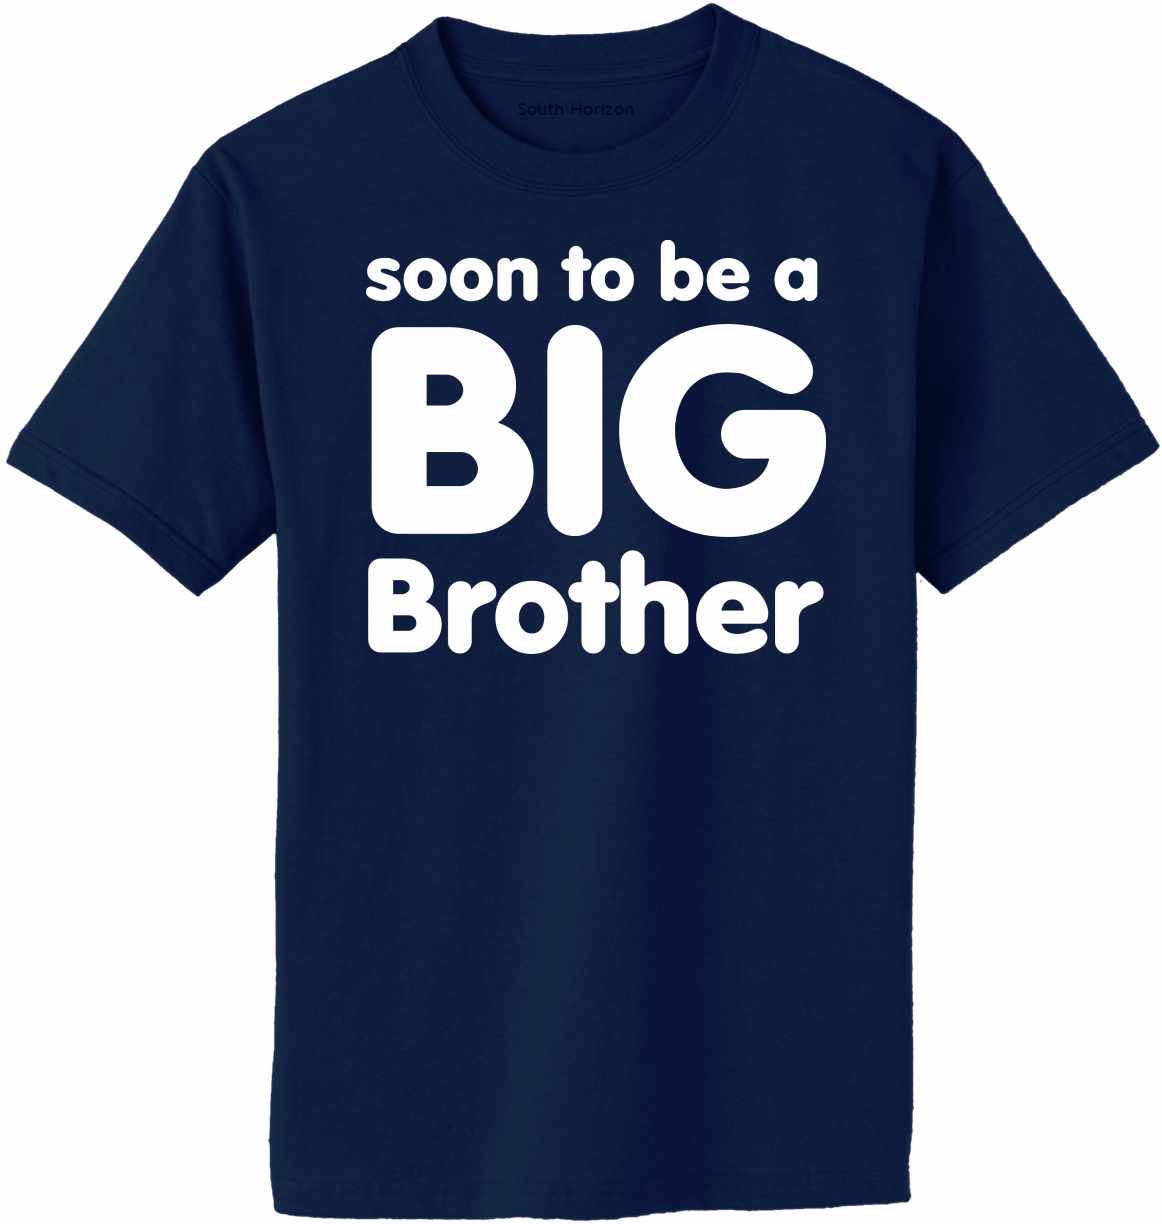 Soon to be a BIG BROTHER Adult T-Shirt